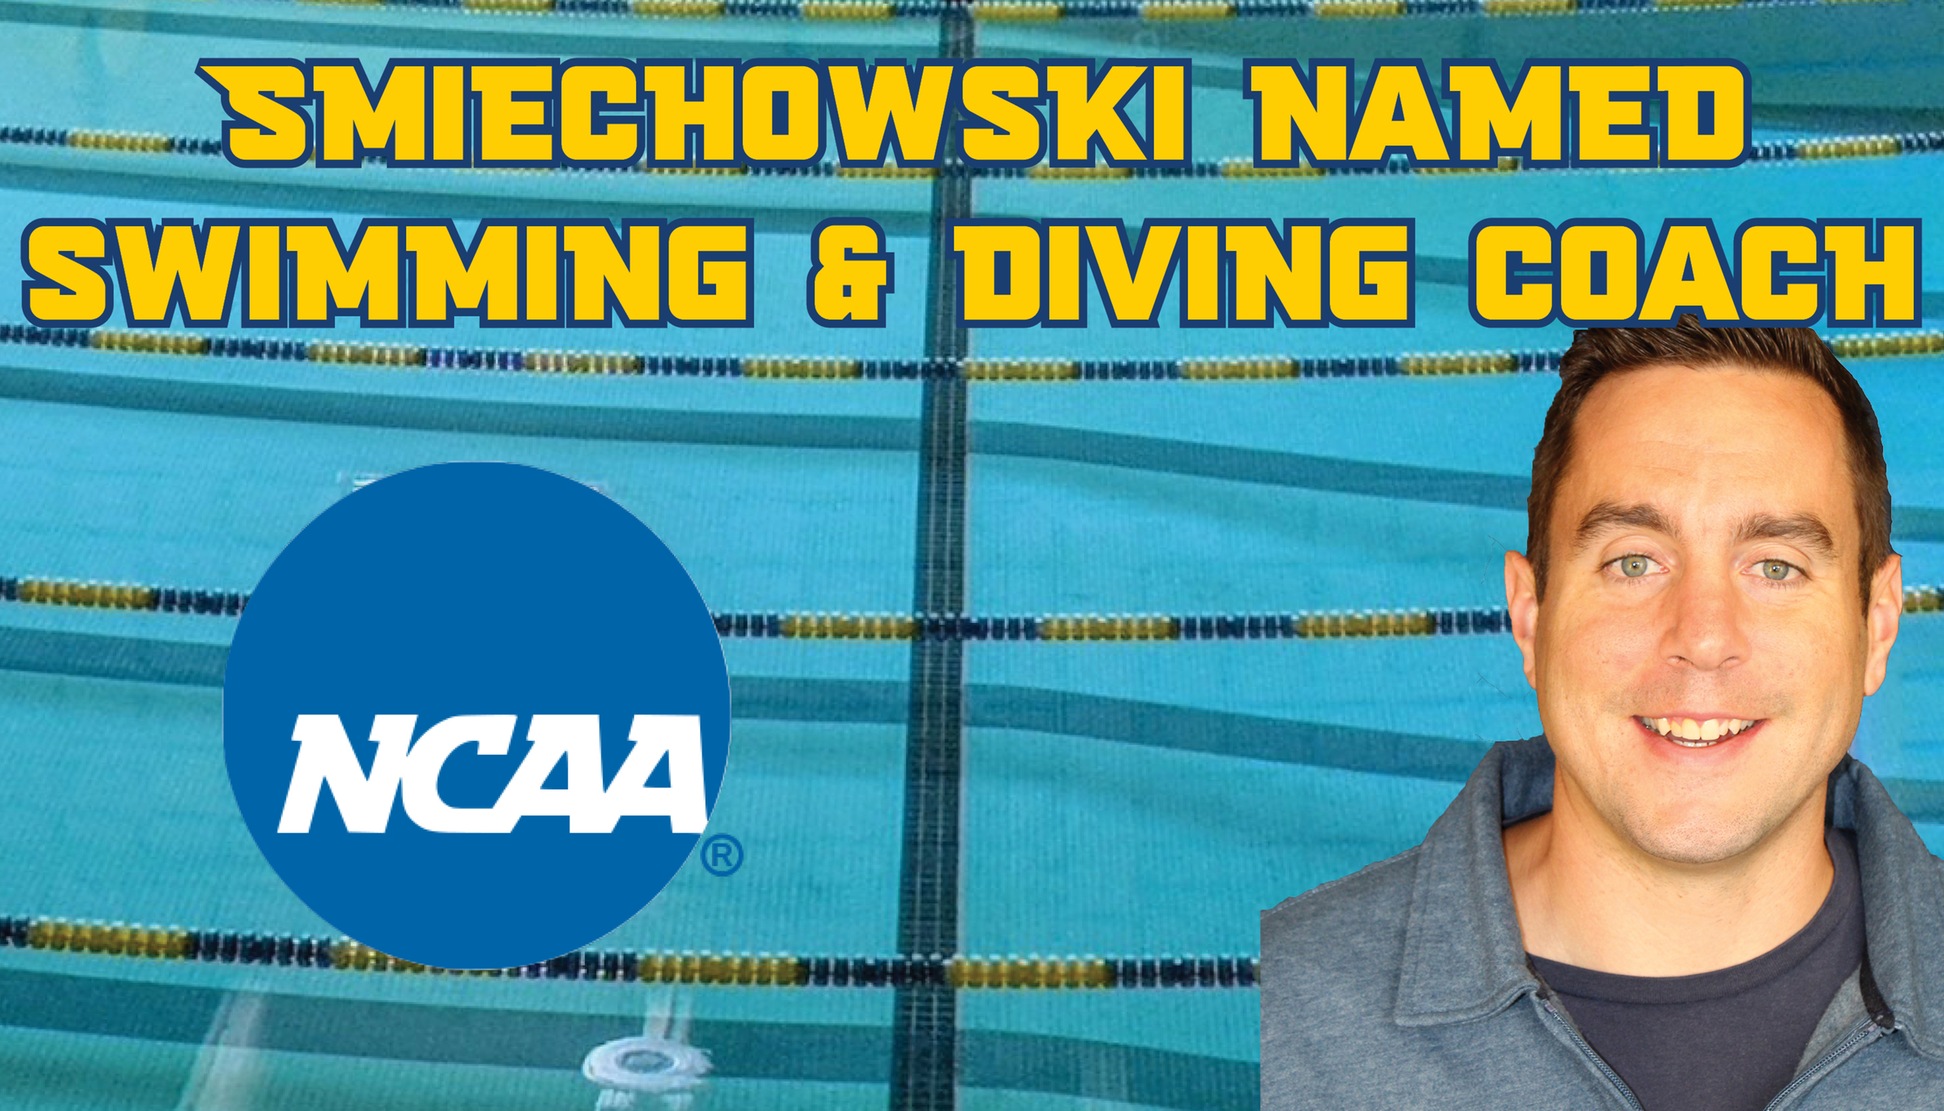 Michael Smiechowski named new swimming & diving coach